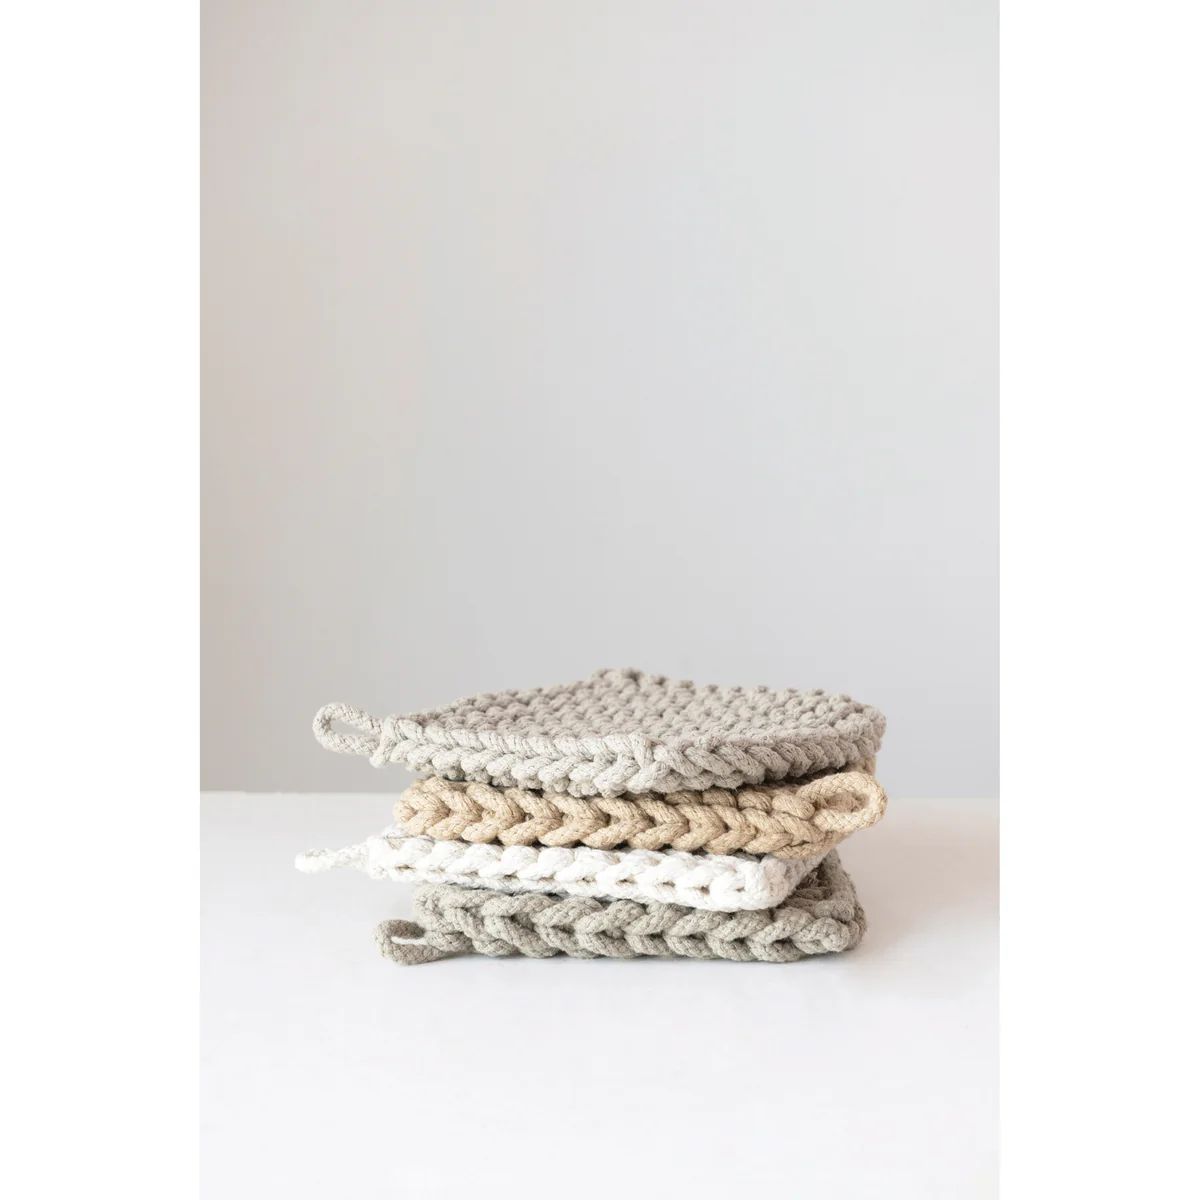 Crocheted Pot Holder | The Southern Porch